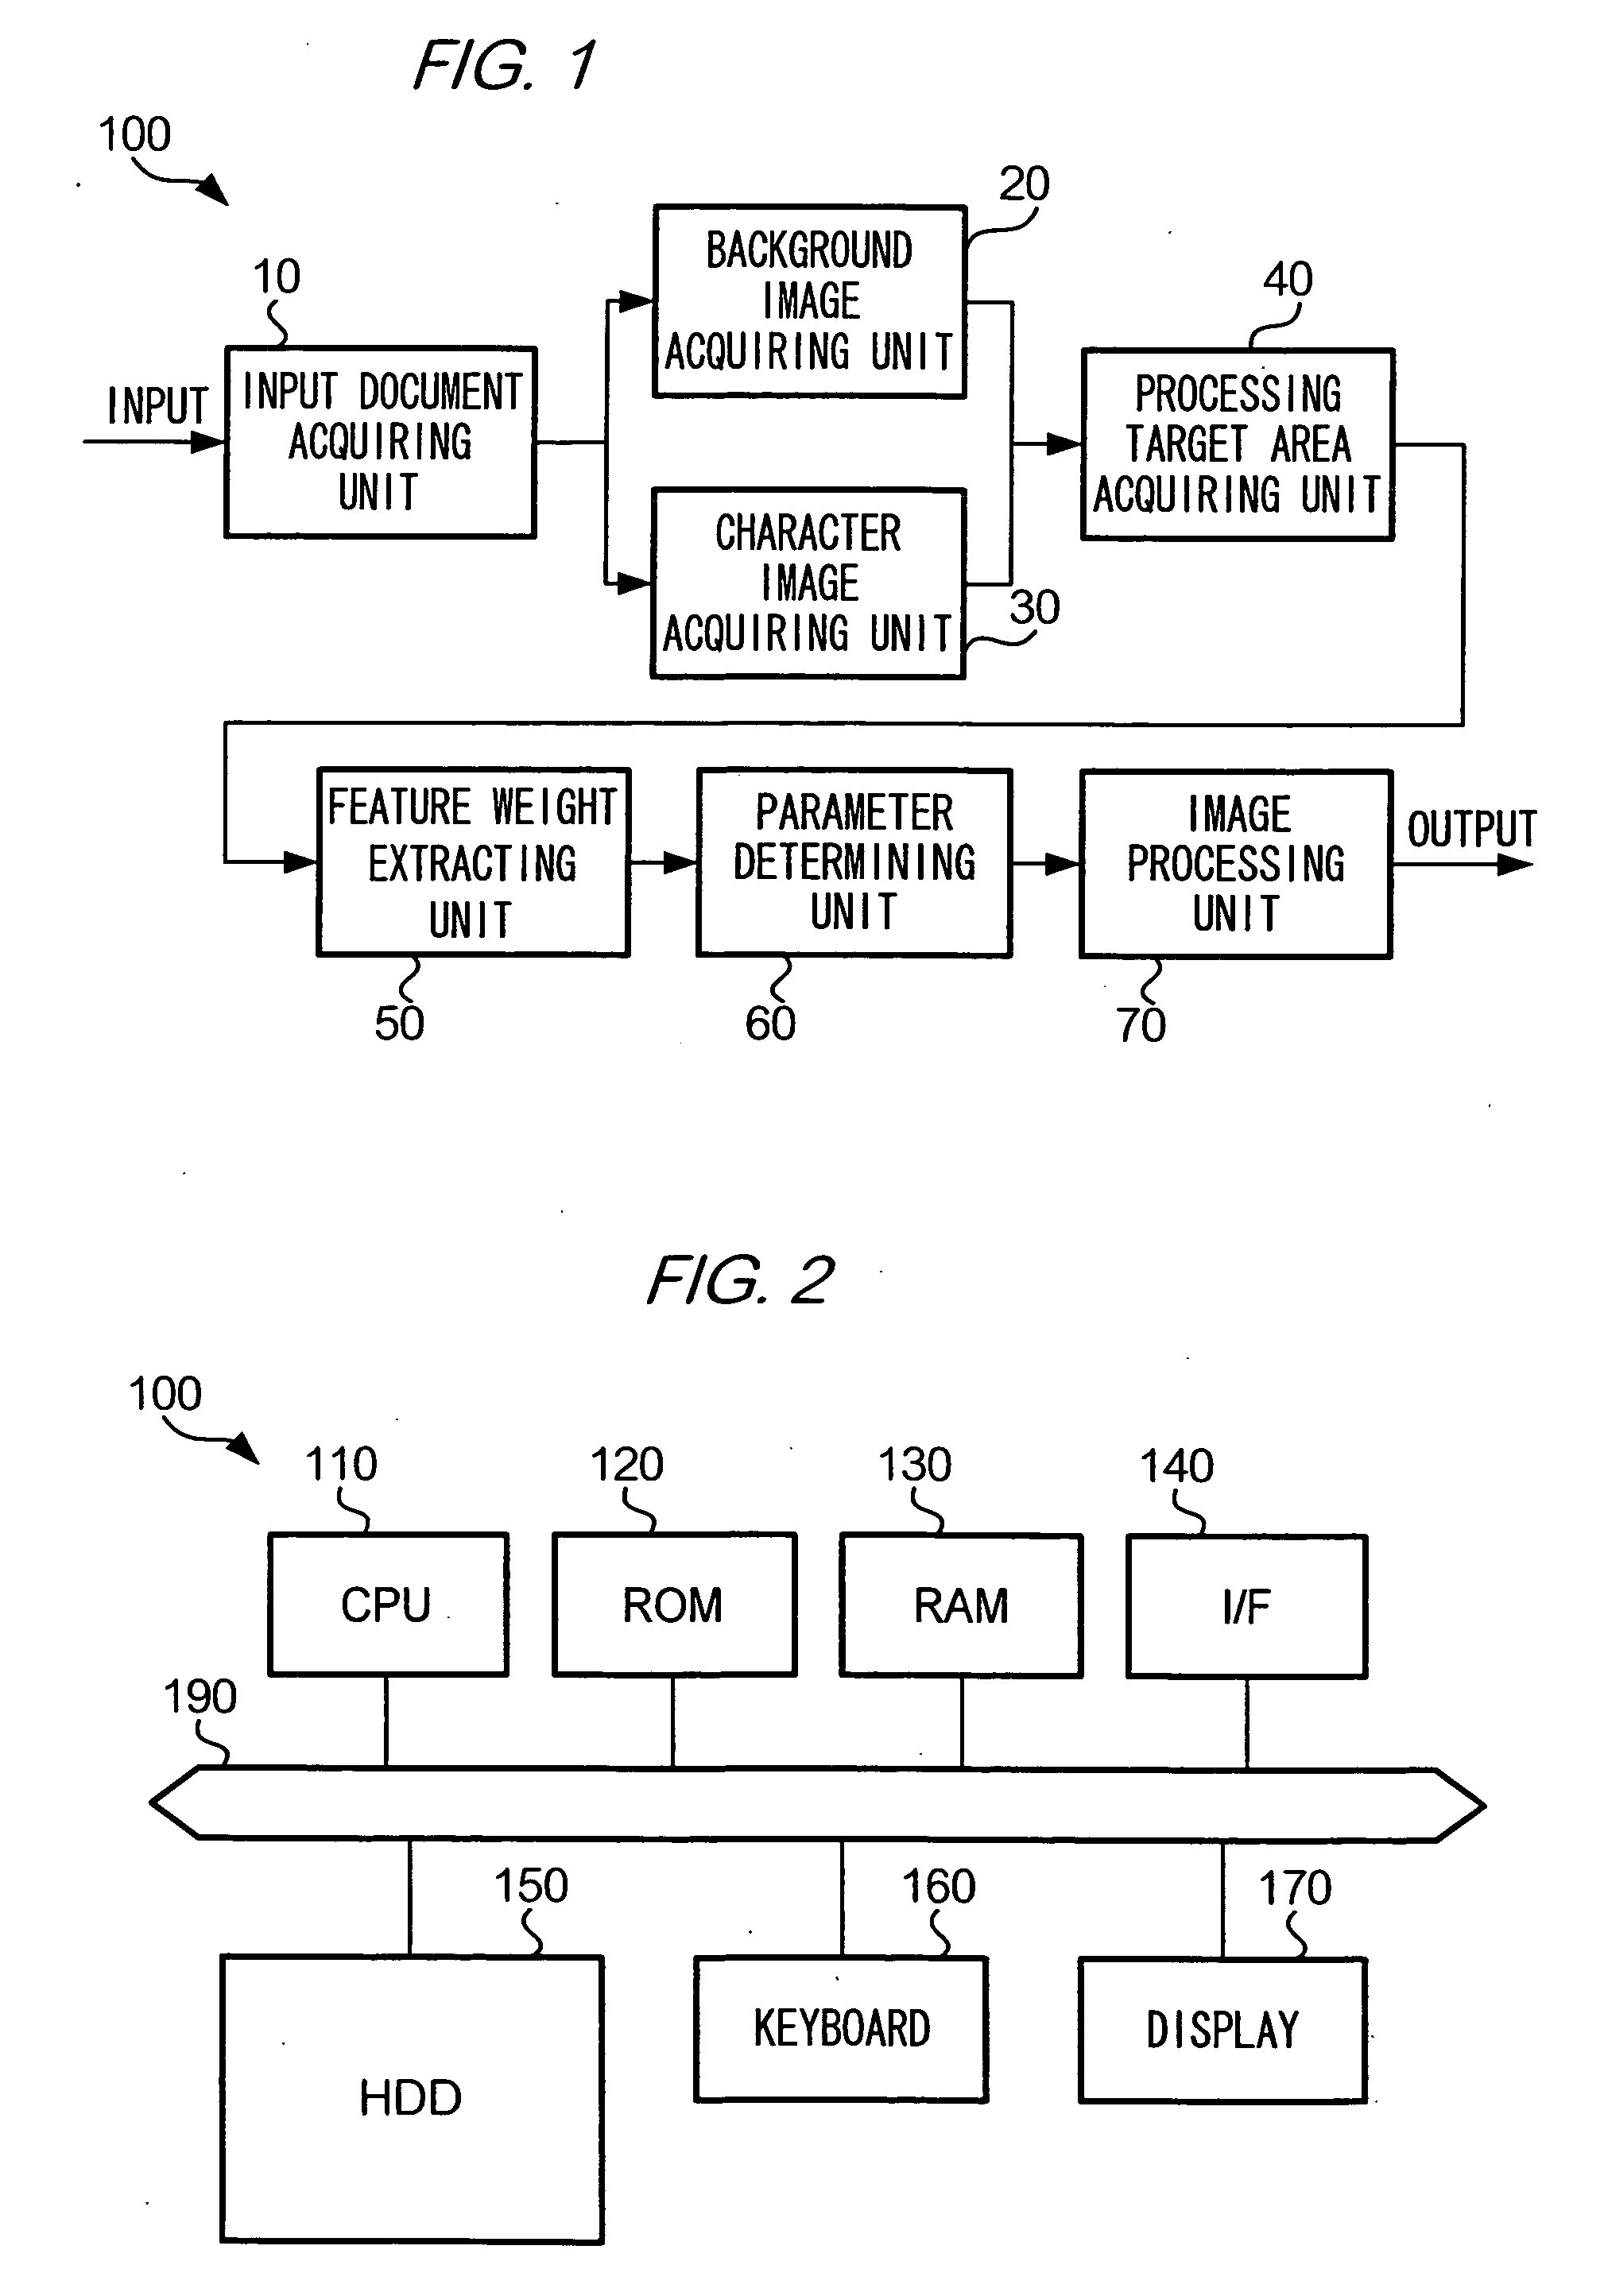 Image processing apparatus, image processing method, and program product